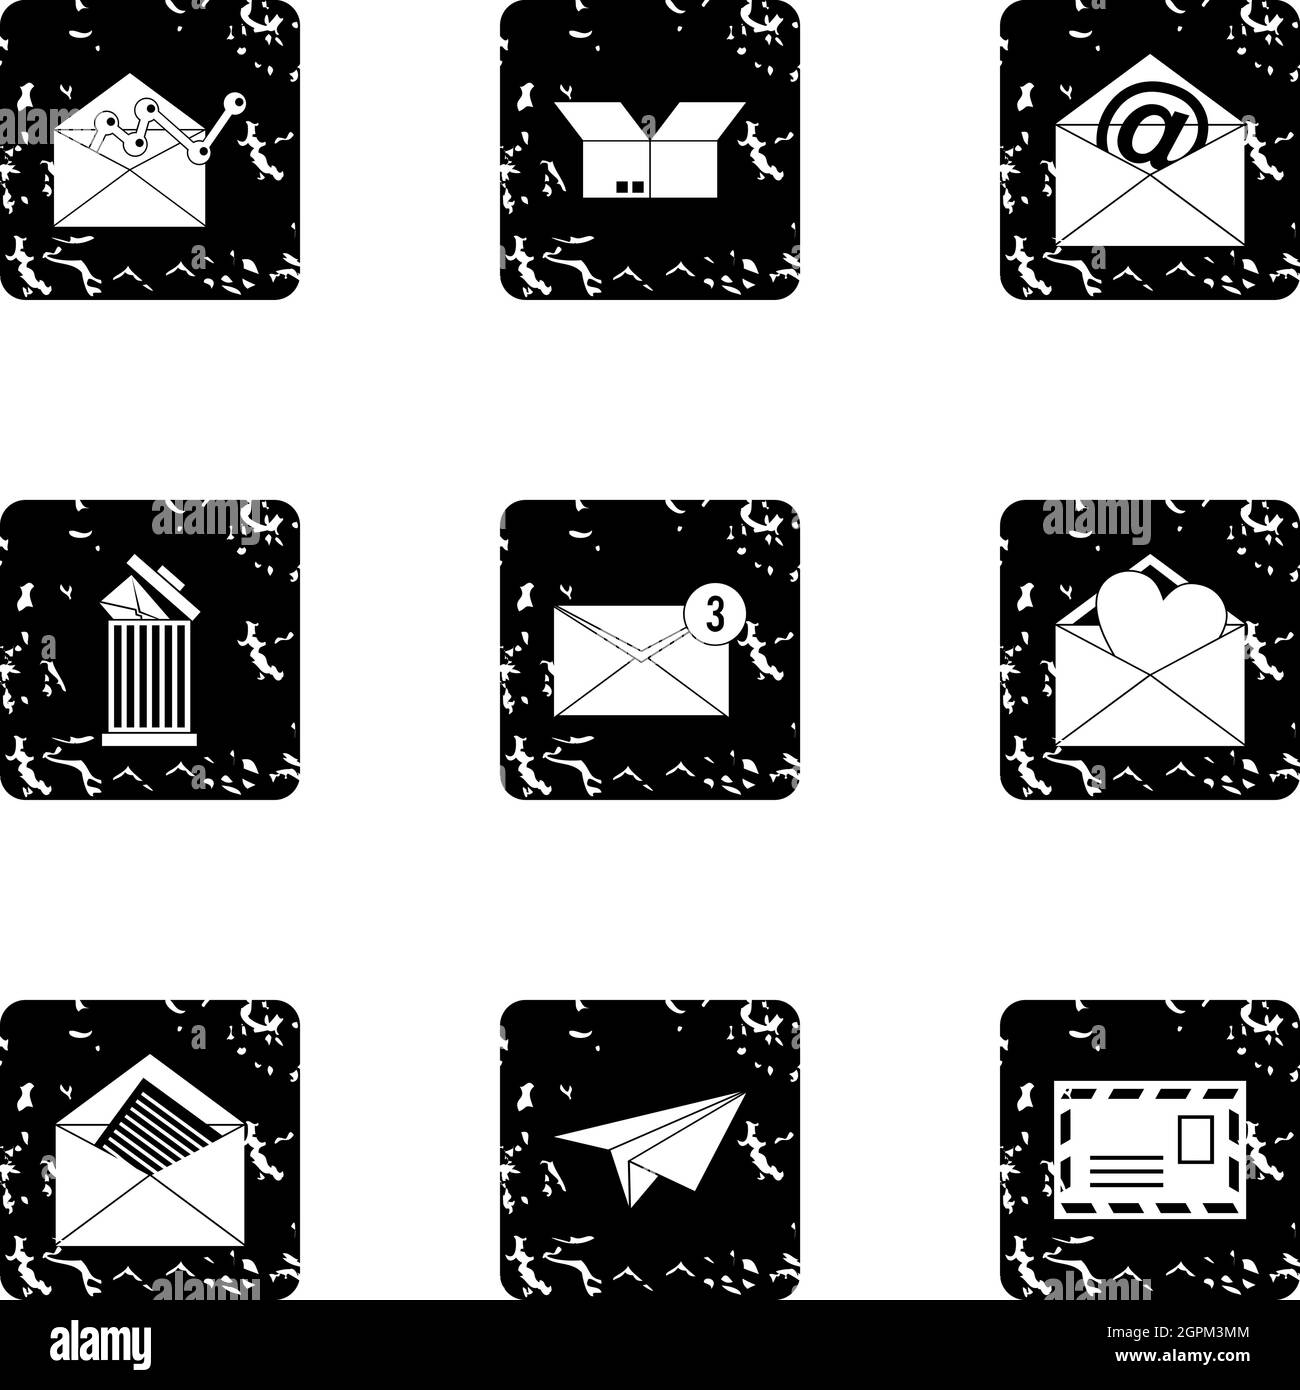 E-mail icons set, grunge style Stock Vector